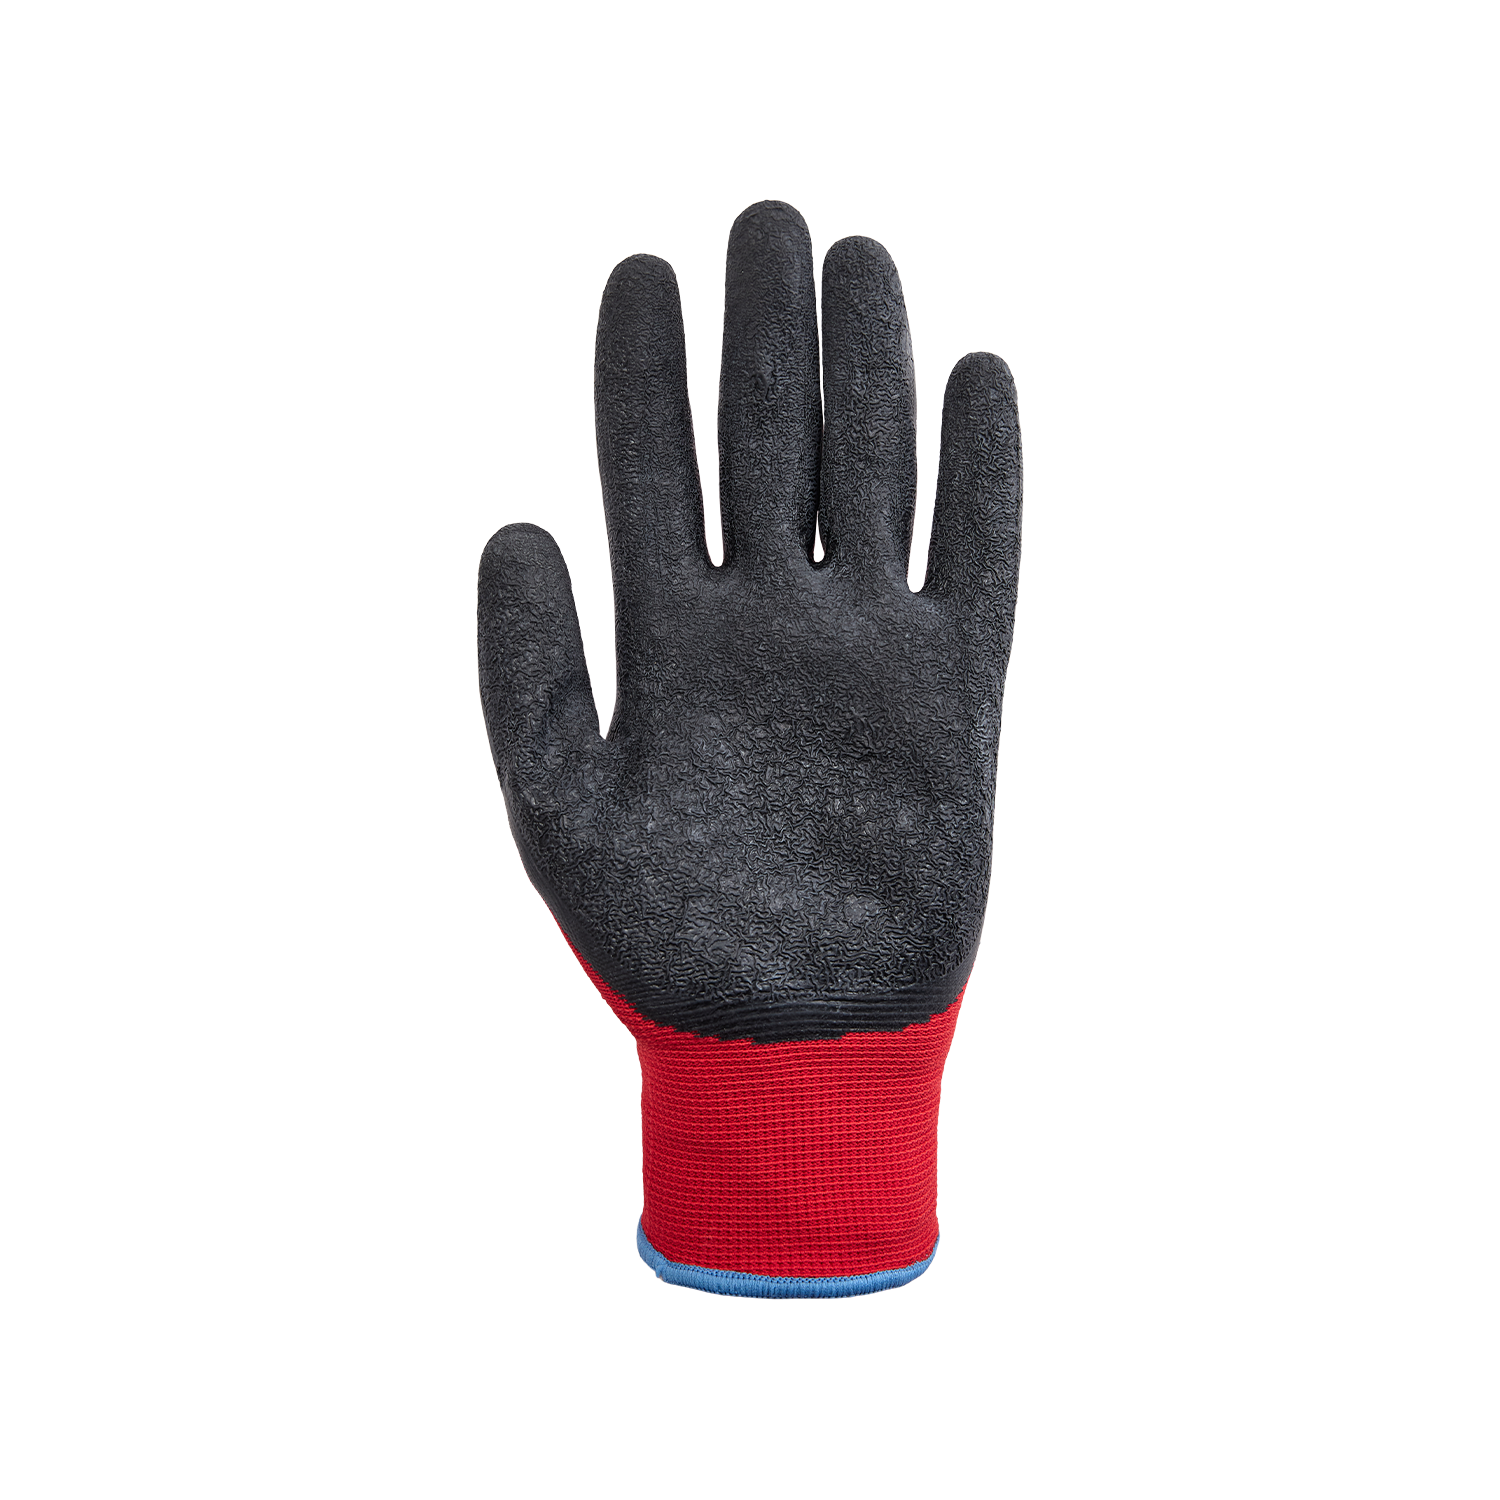 NORSE PowerGrip assembly gloves size 10